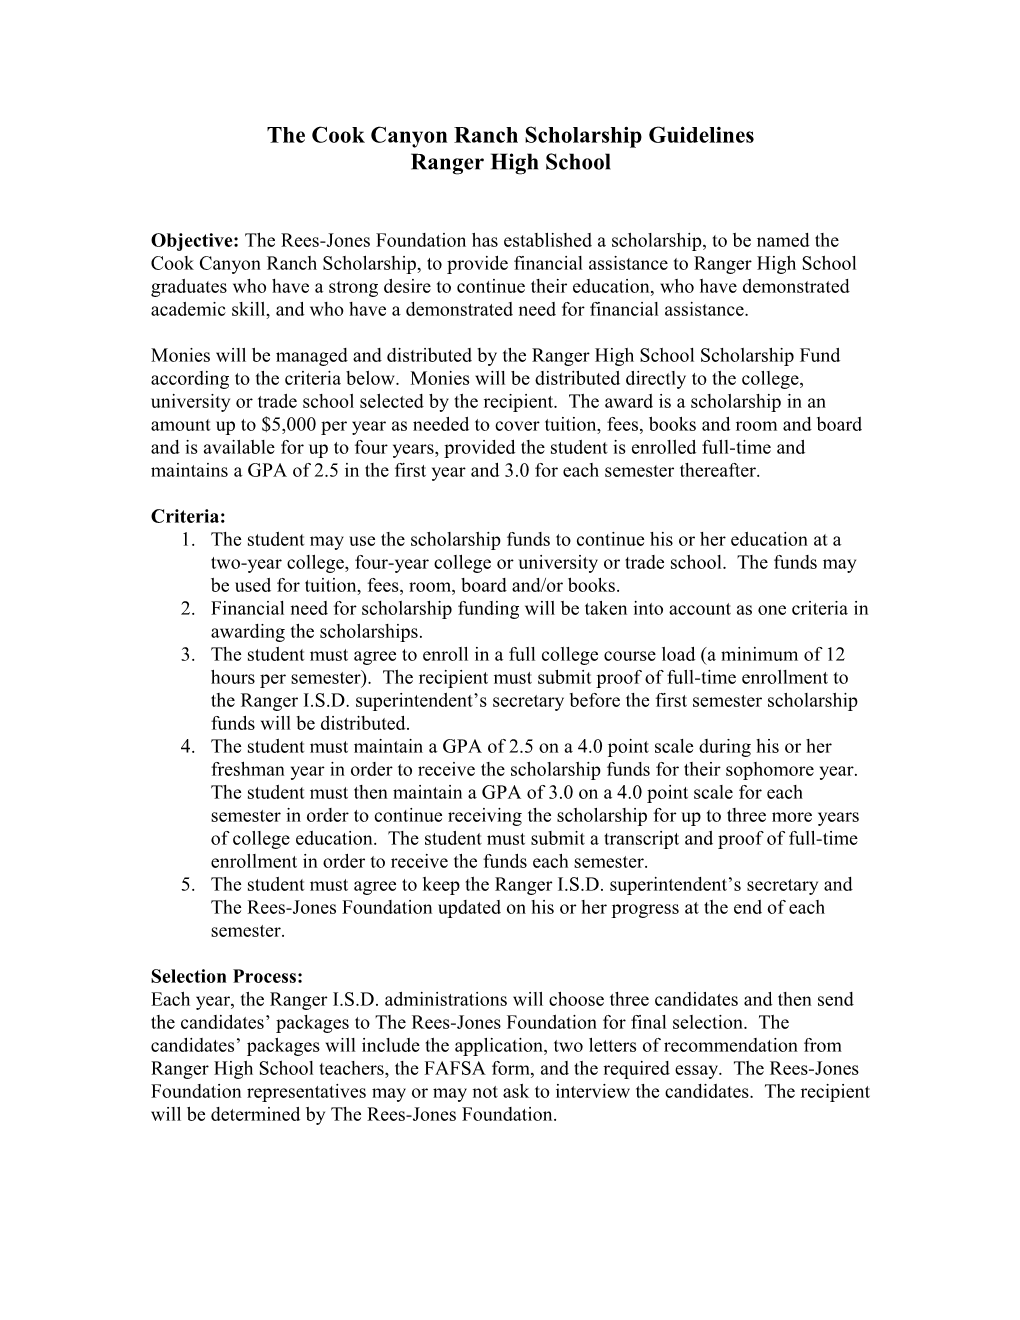 The Cook Canyon Ranch Scholarship Guidelines